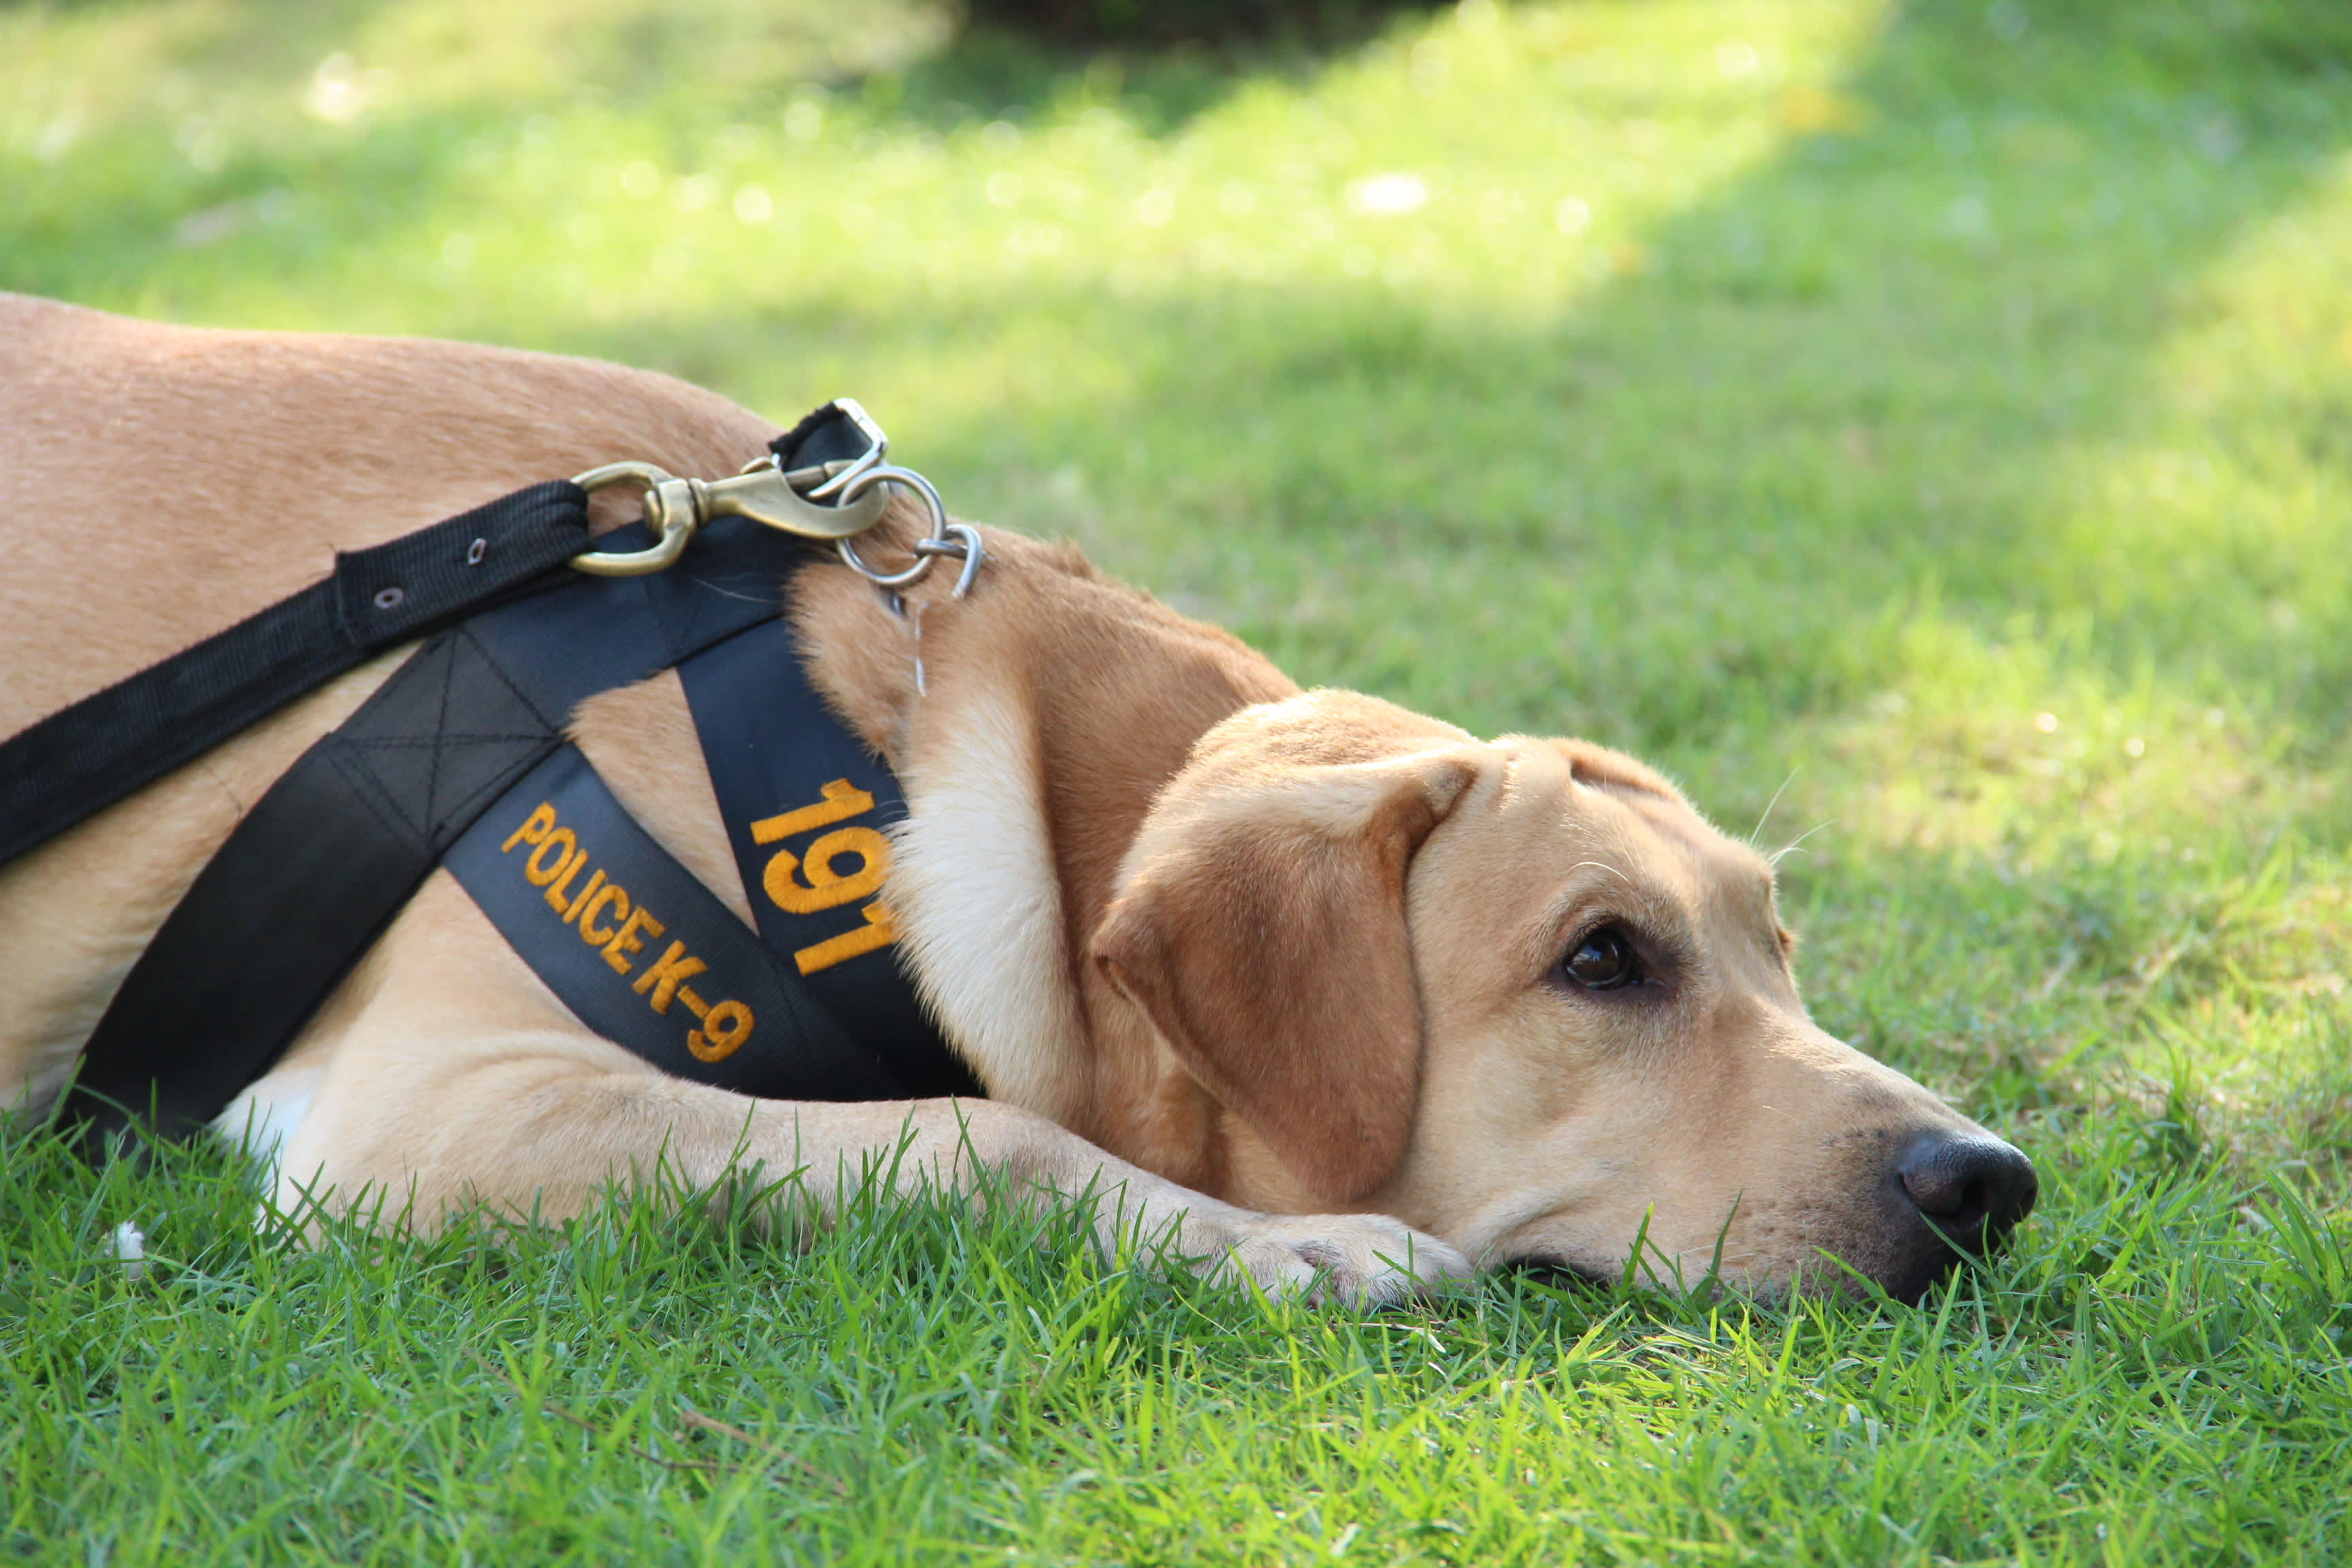 can a civilian adopt a retired police dog